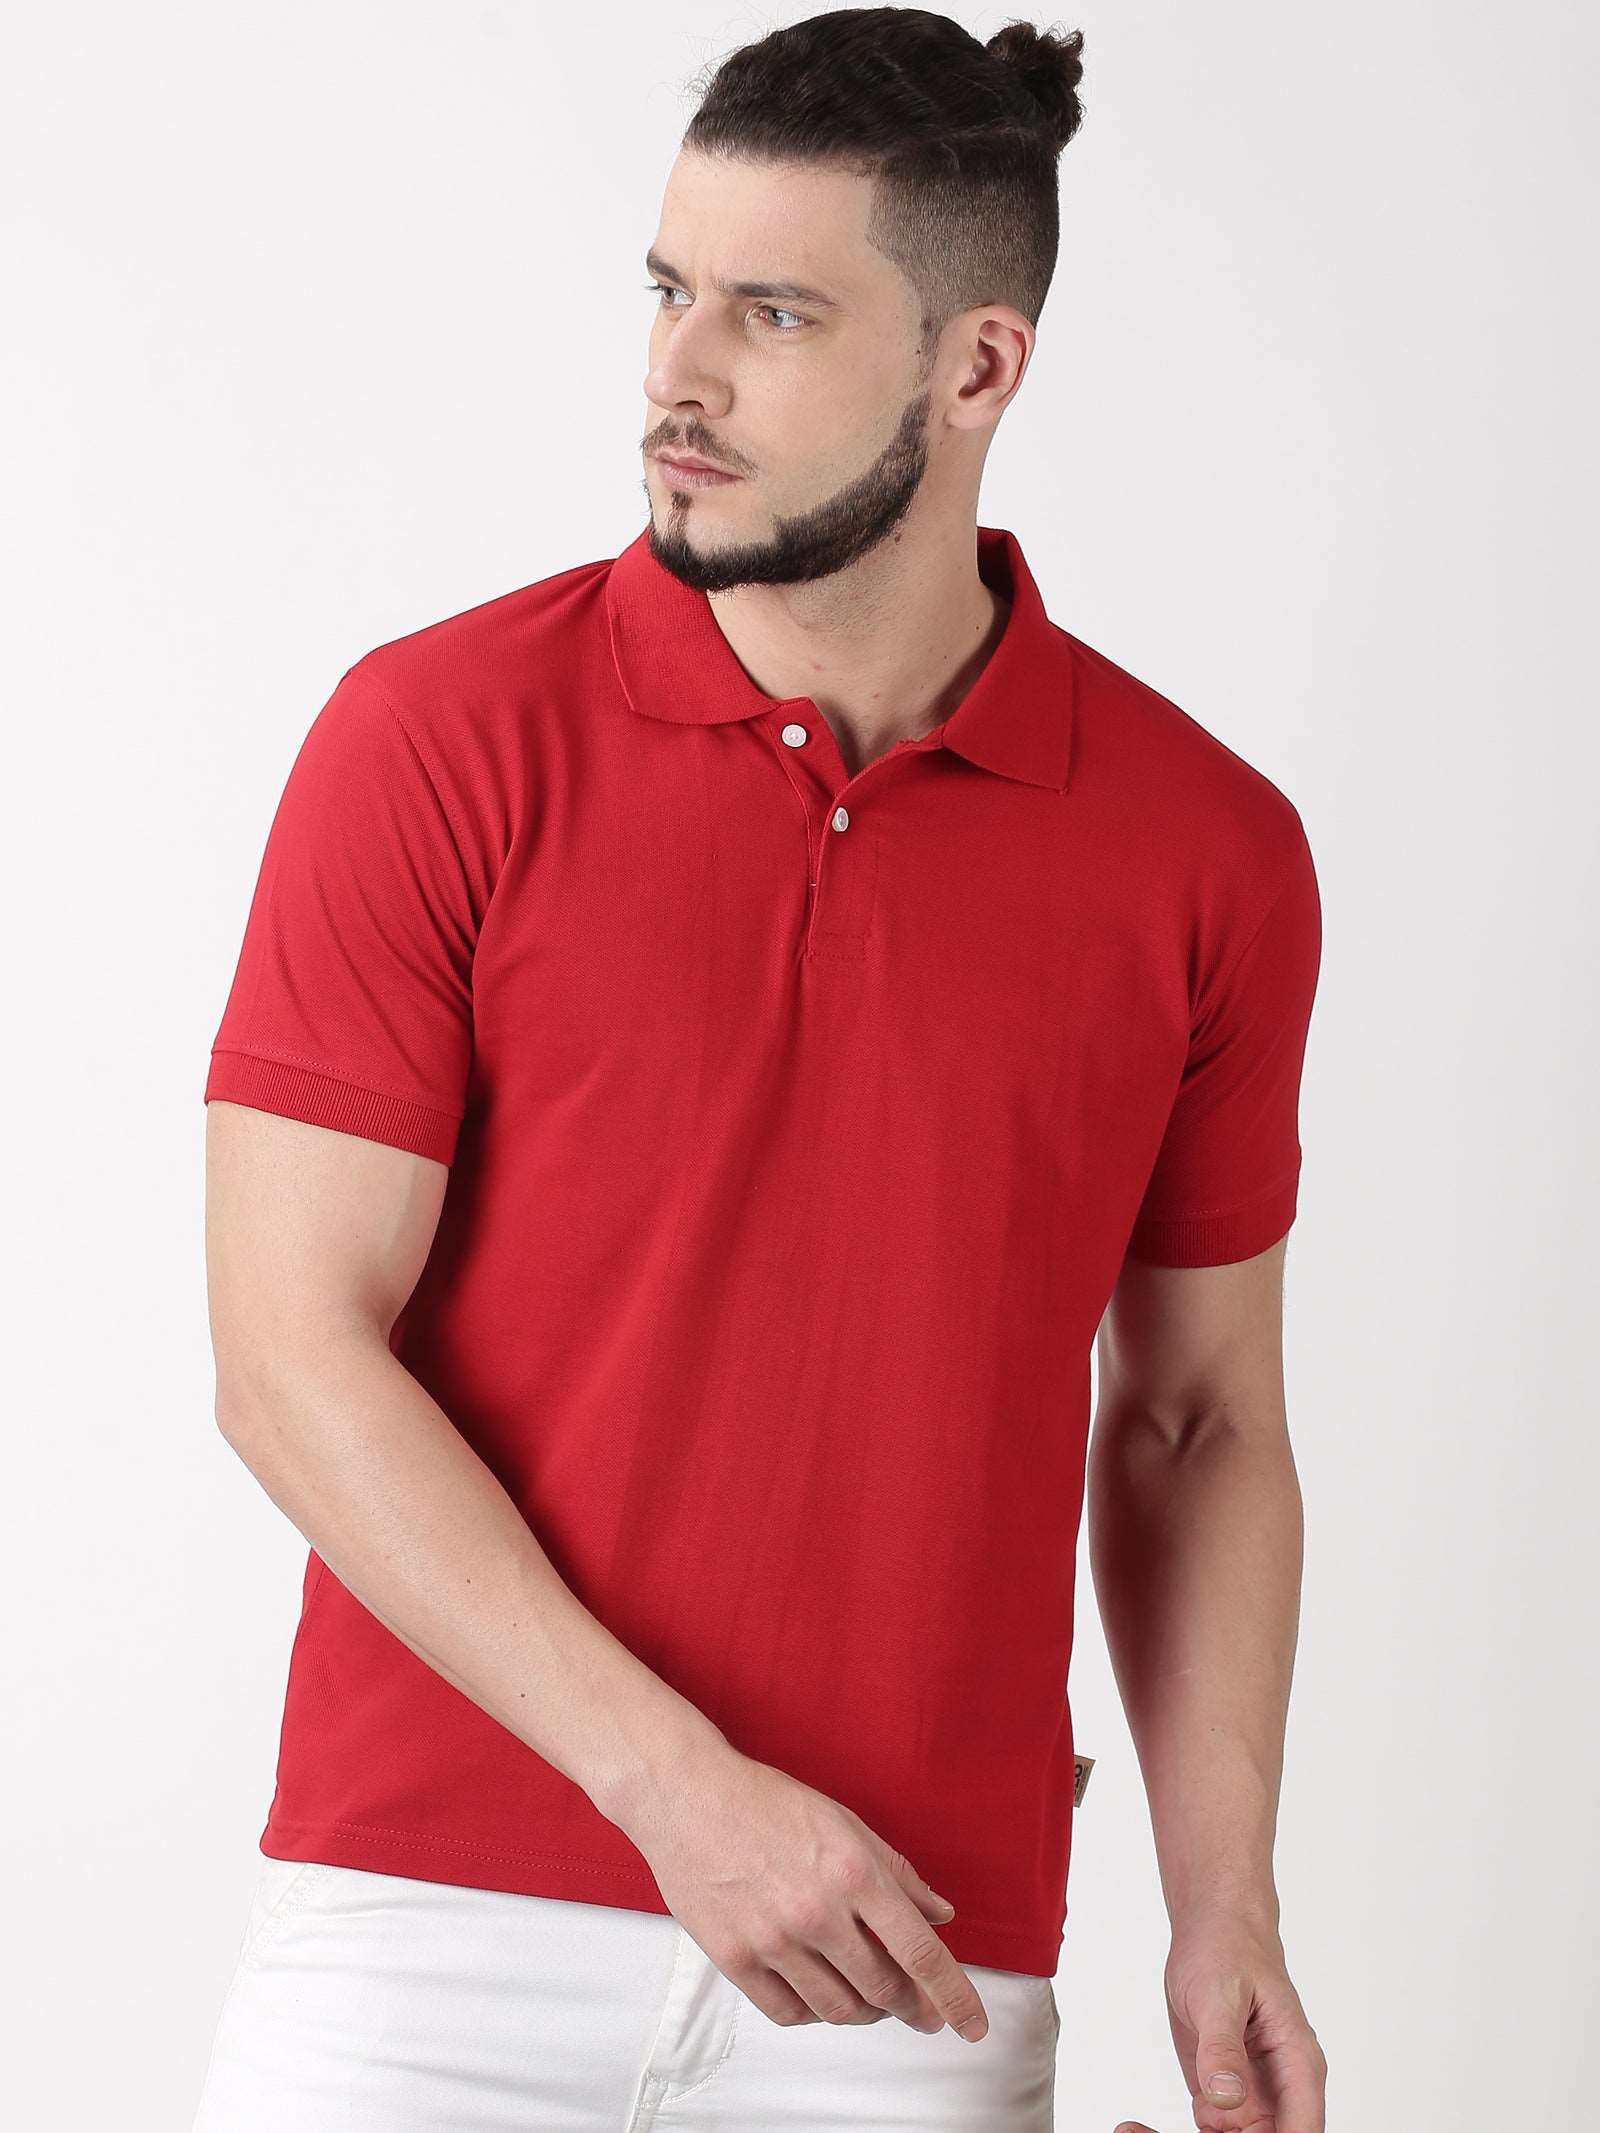 Organic Cotton Polo, Natural Fabric, No Synthetic Dyes